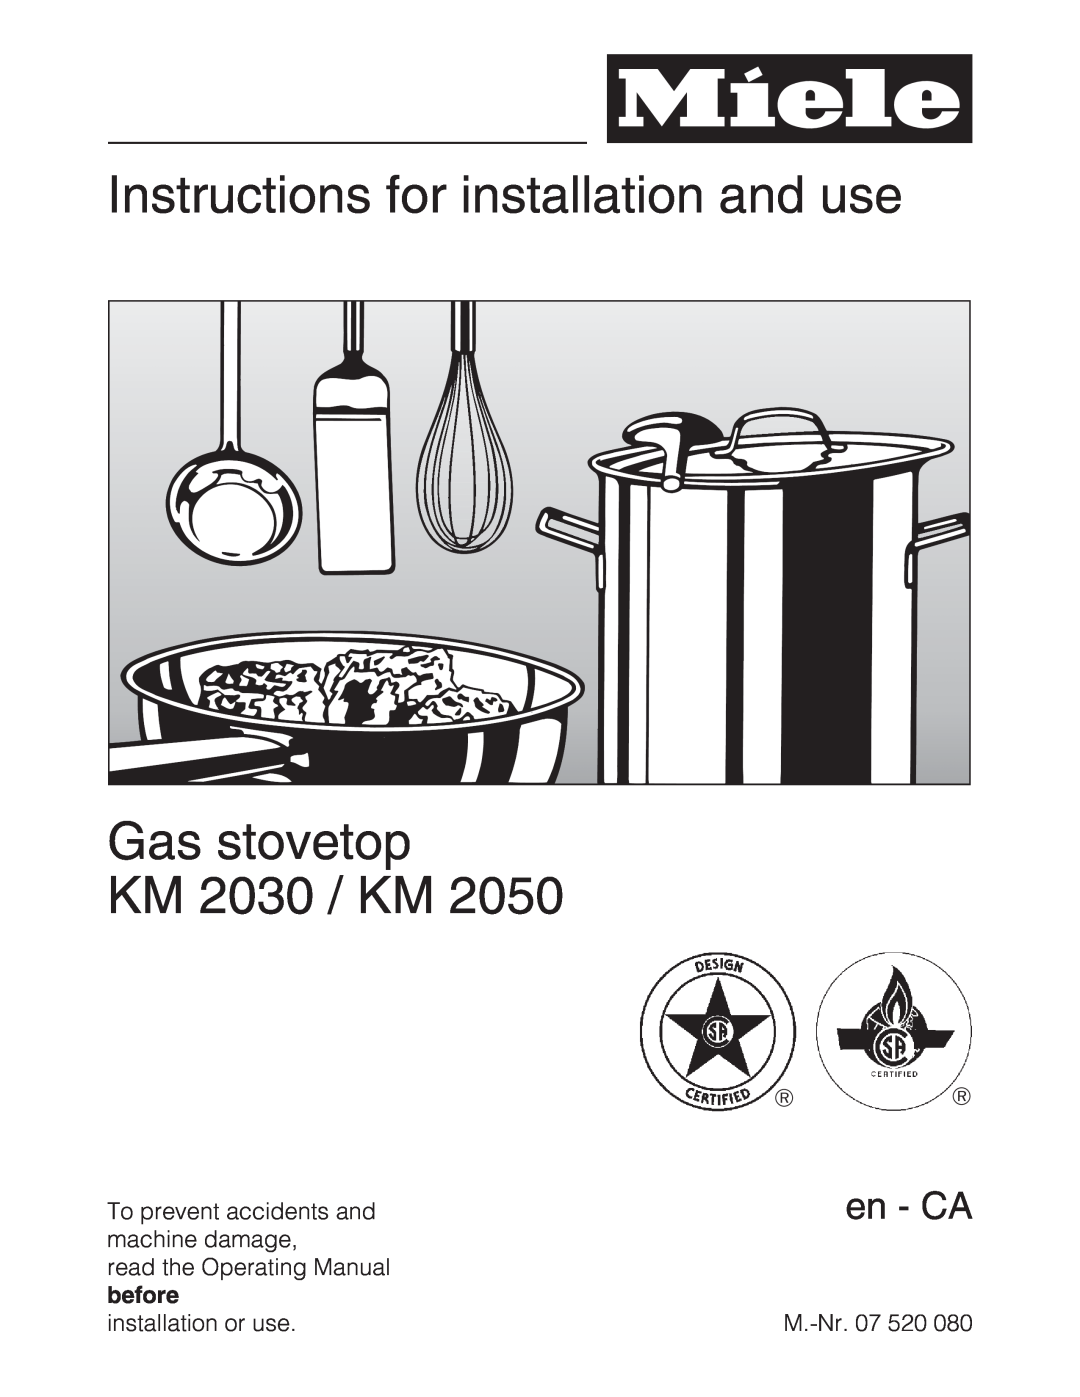 Miele KM 2050 manual Instructions for installation and use, Gas stovetop KM 2030 / KM, en - CA 